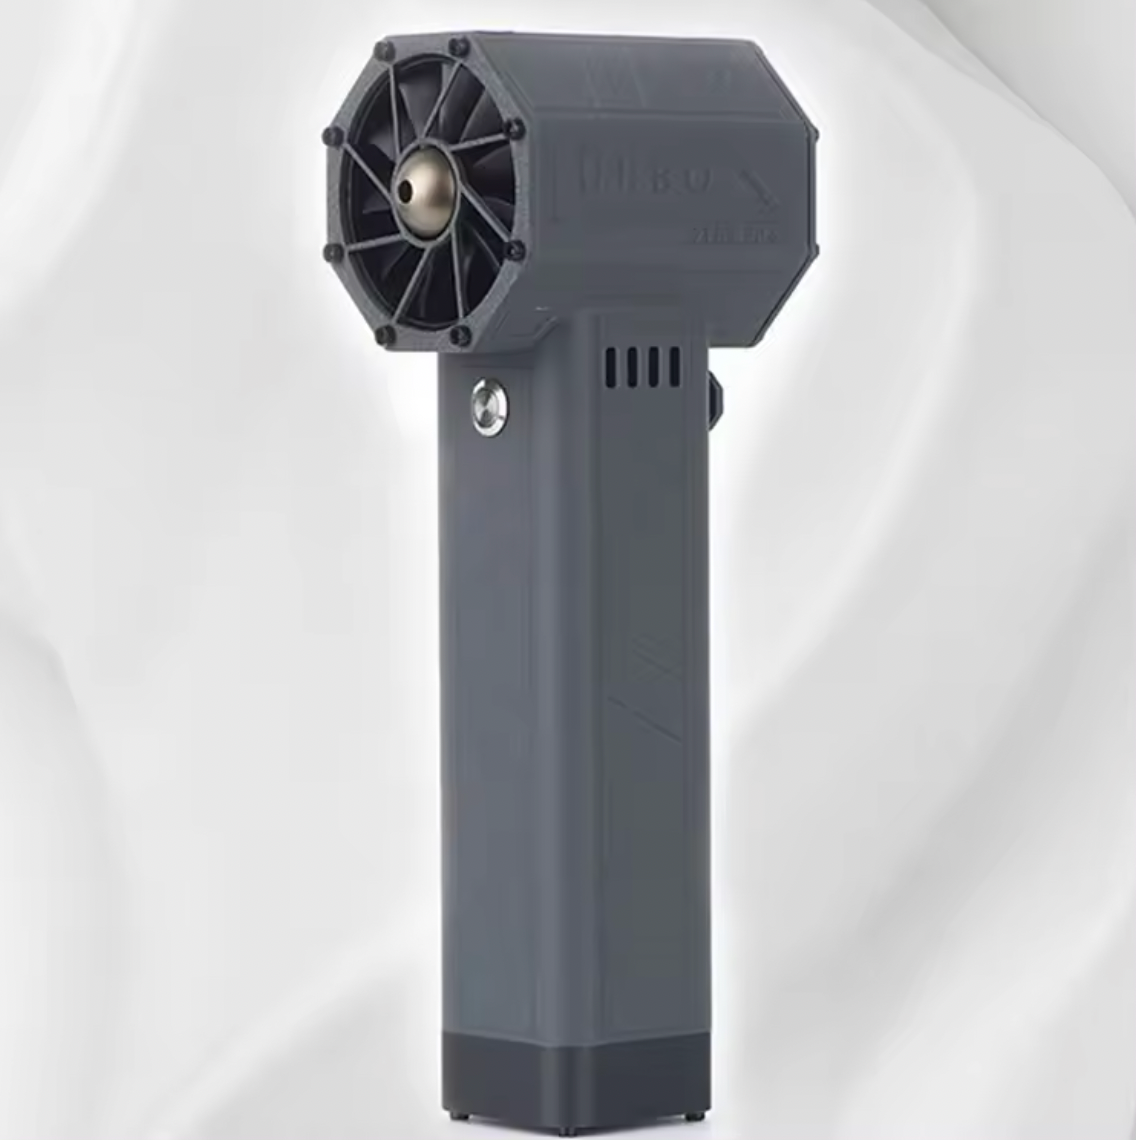 Powerful Turbo Jet Air Blower Fan For Multipurpose Use (pre-order in stock 05/15)